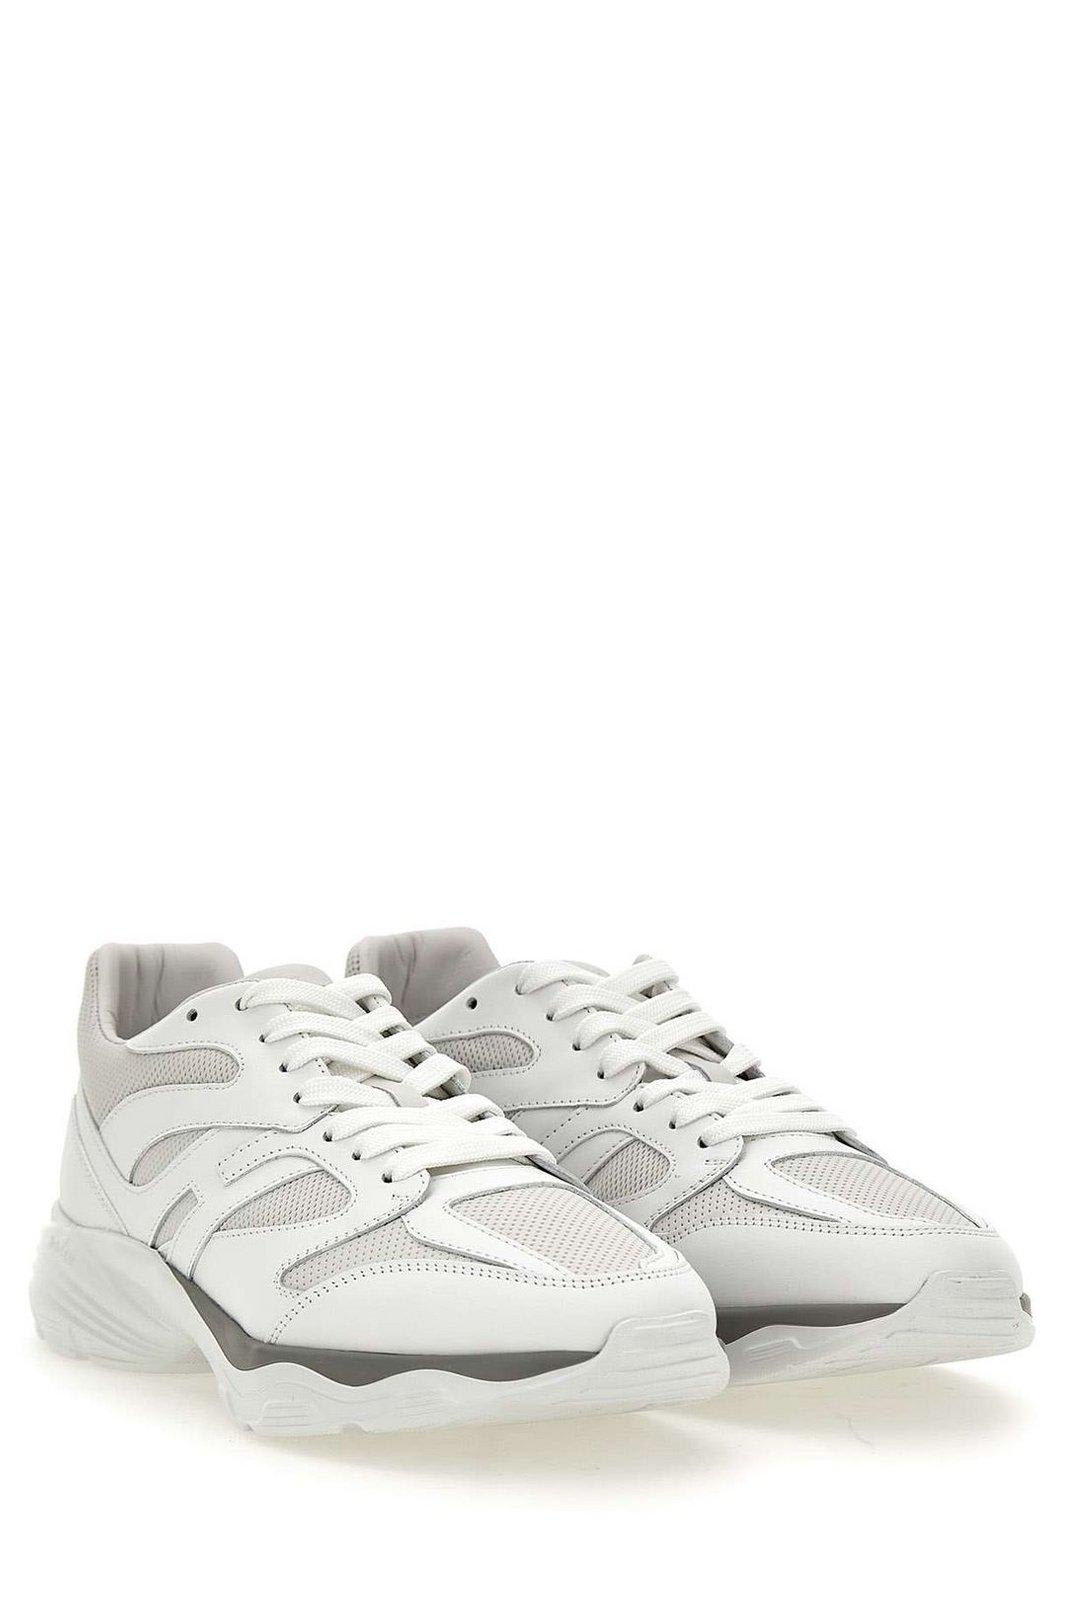 Shop Hogan Allac Panelled Lace-up Sneakers